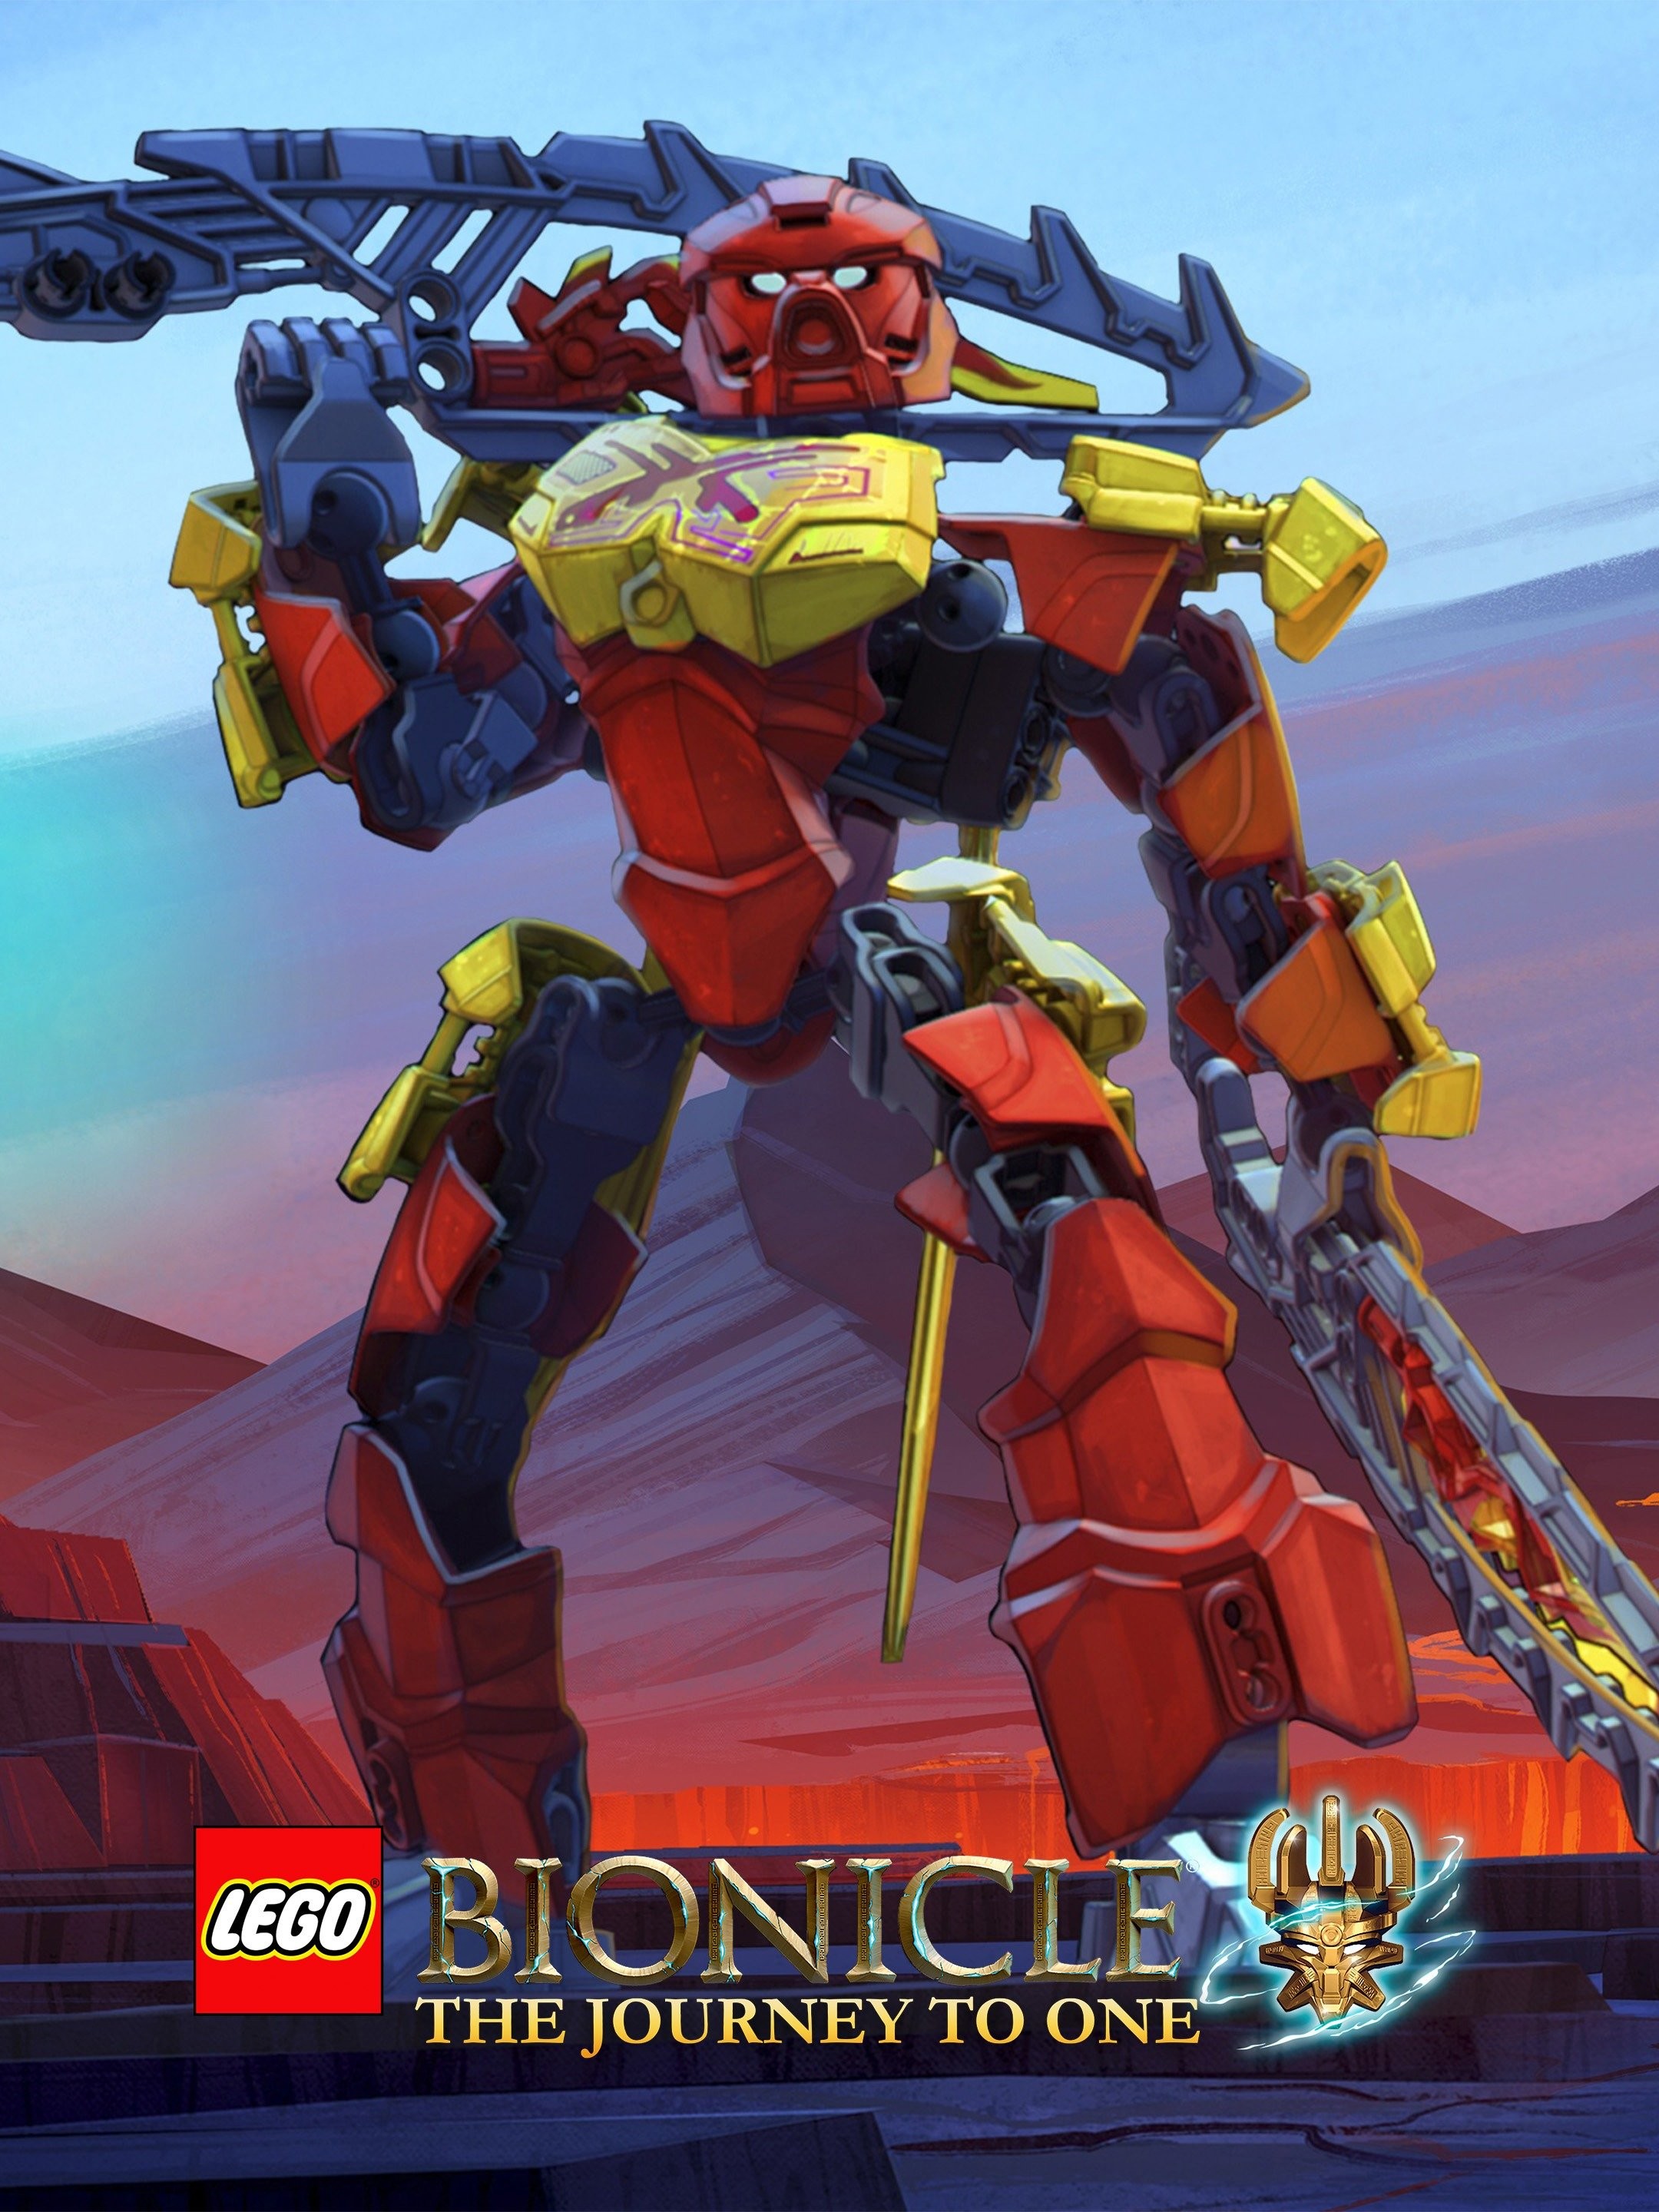 LEGO Bionicle The Journey to One Season 2 Rotten Tomatoes